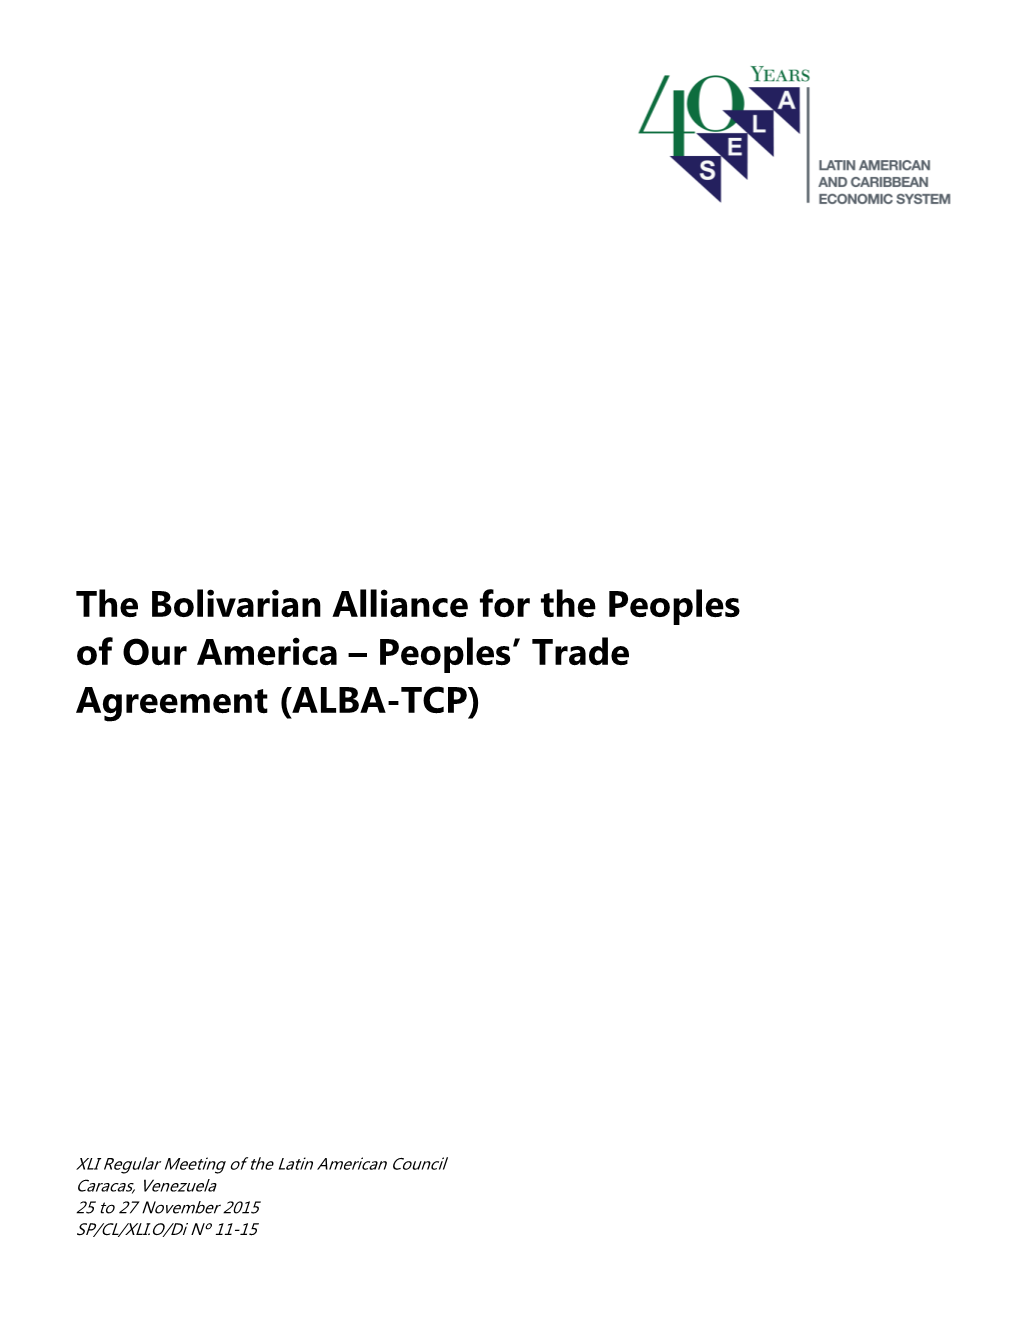 Peoples' Trade Agreement (ALBA-TCP)